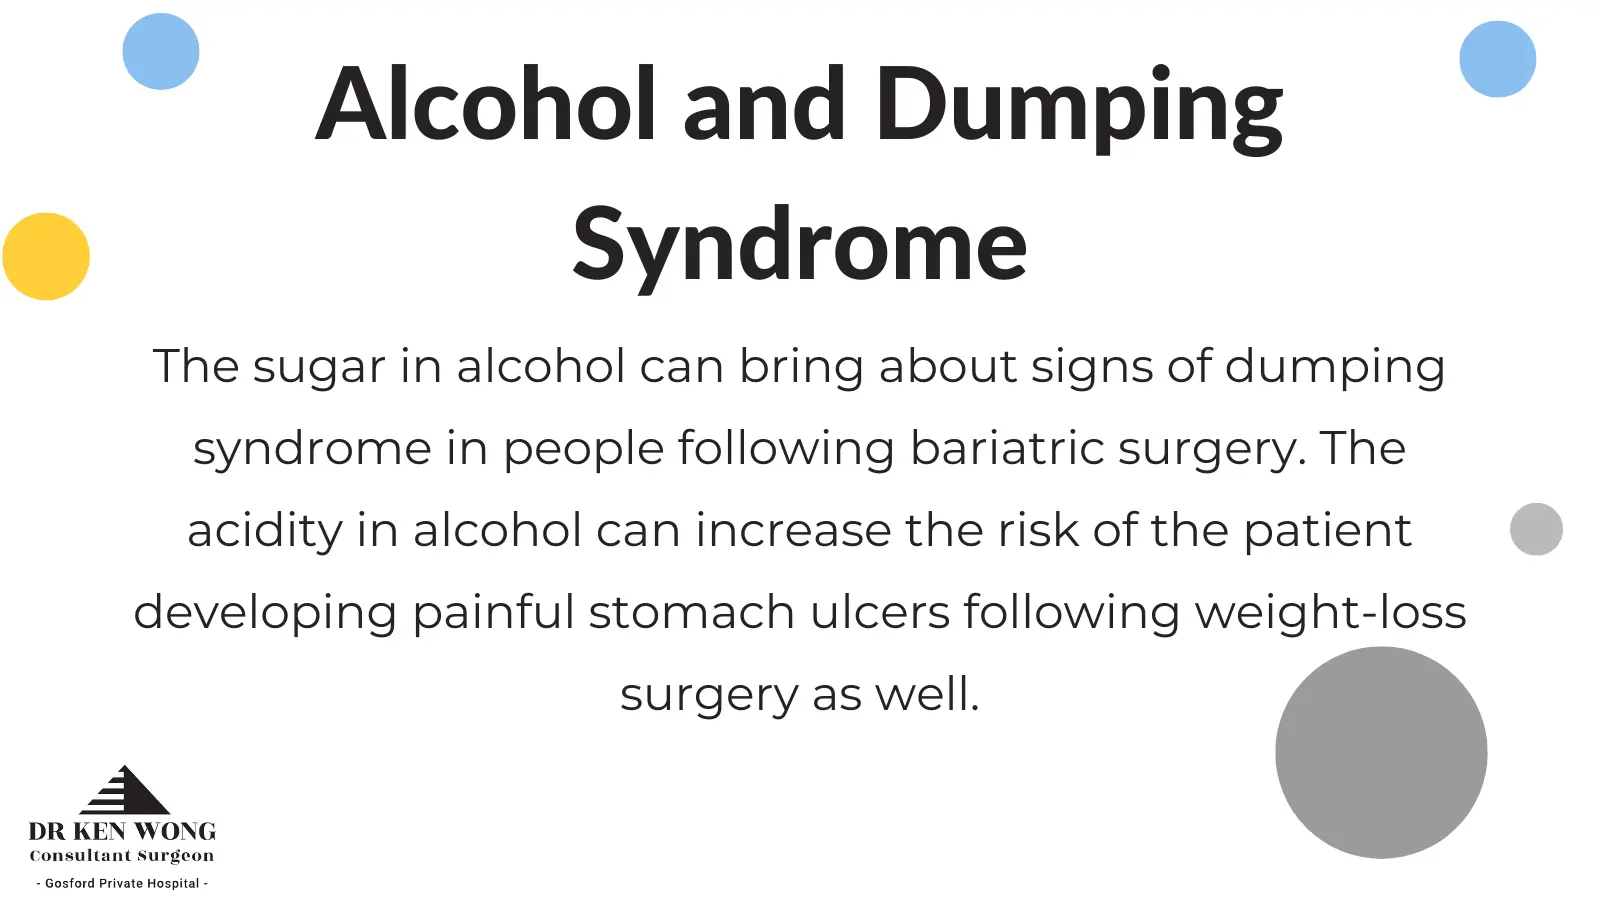 impact of alcohol on the stomach and how it can induce dumping syndrome 